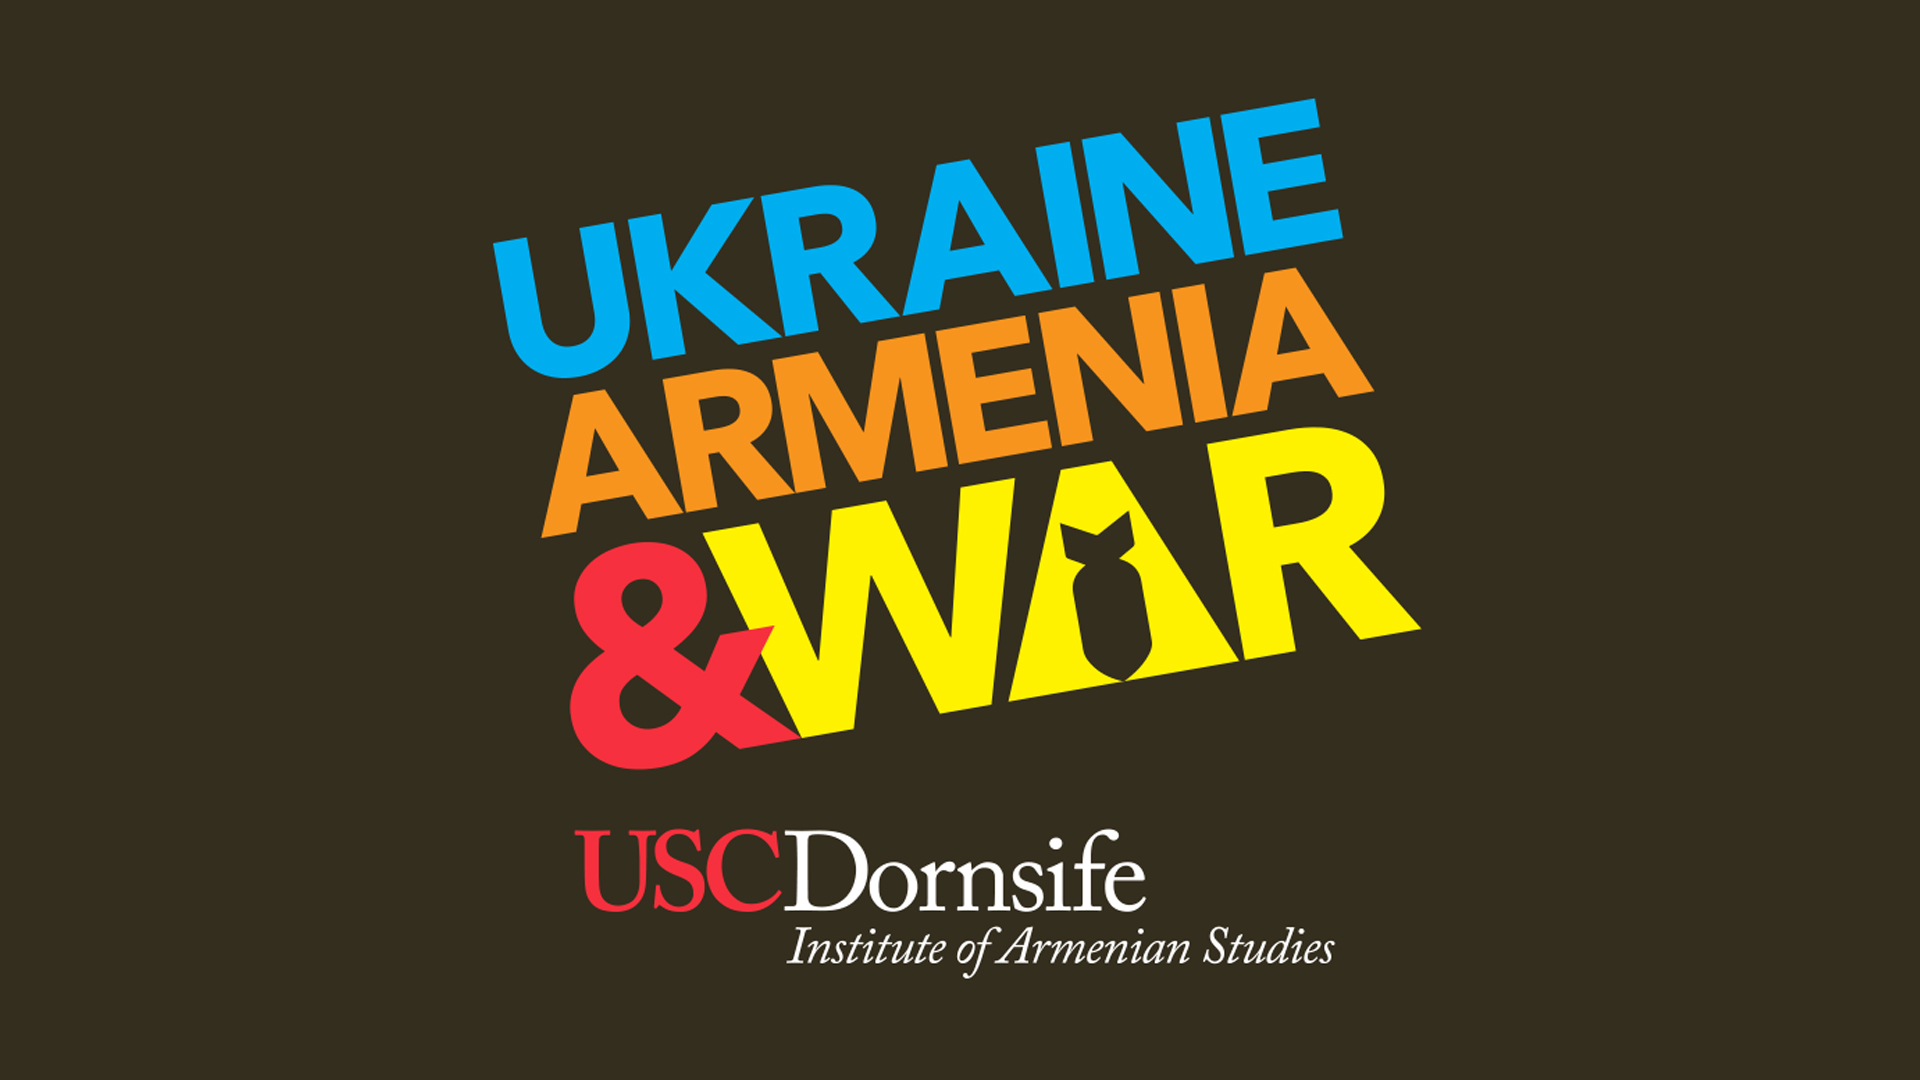 Questions of Sovereignty: Ukraine, Armenia, and War